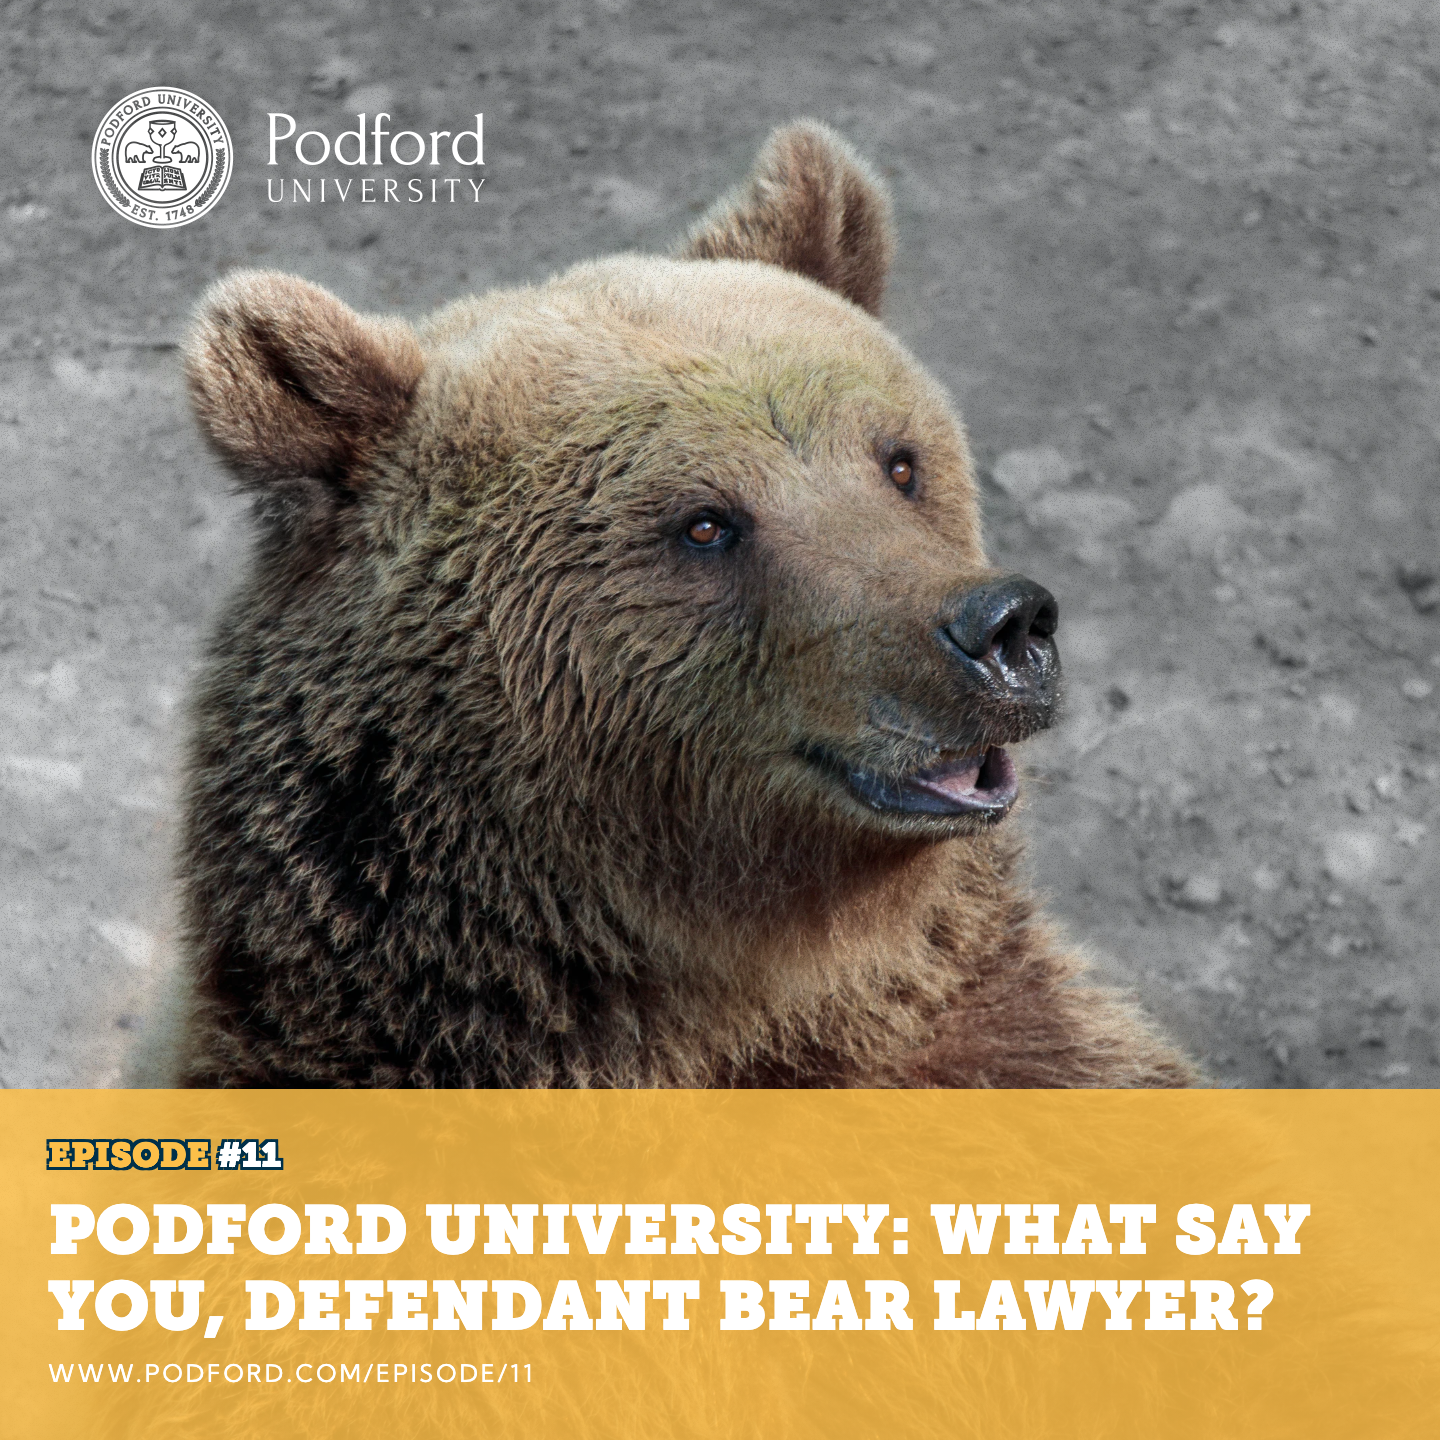 What Say You, Defendant Bear Lawyer?